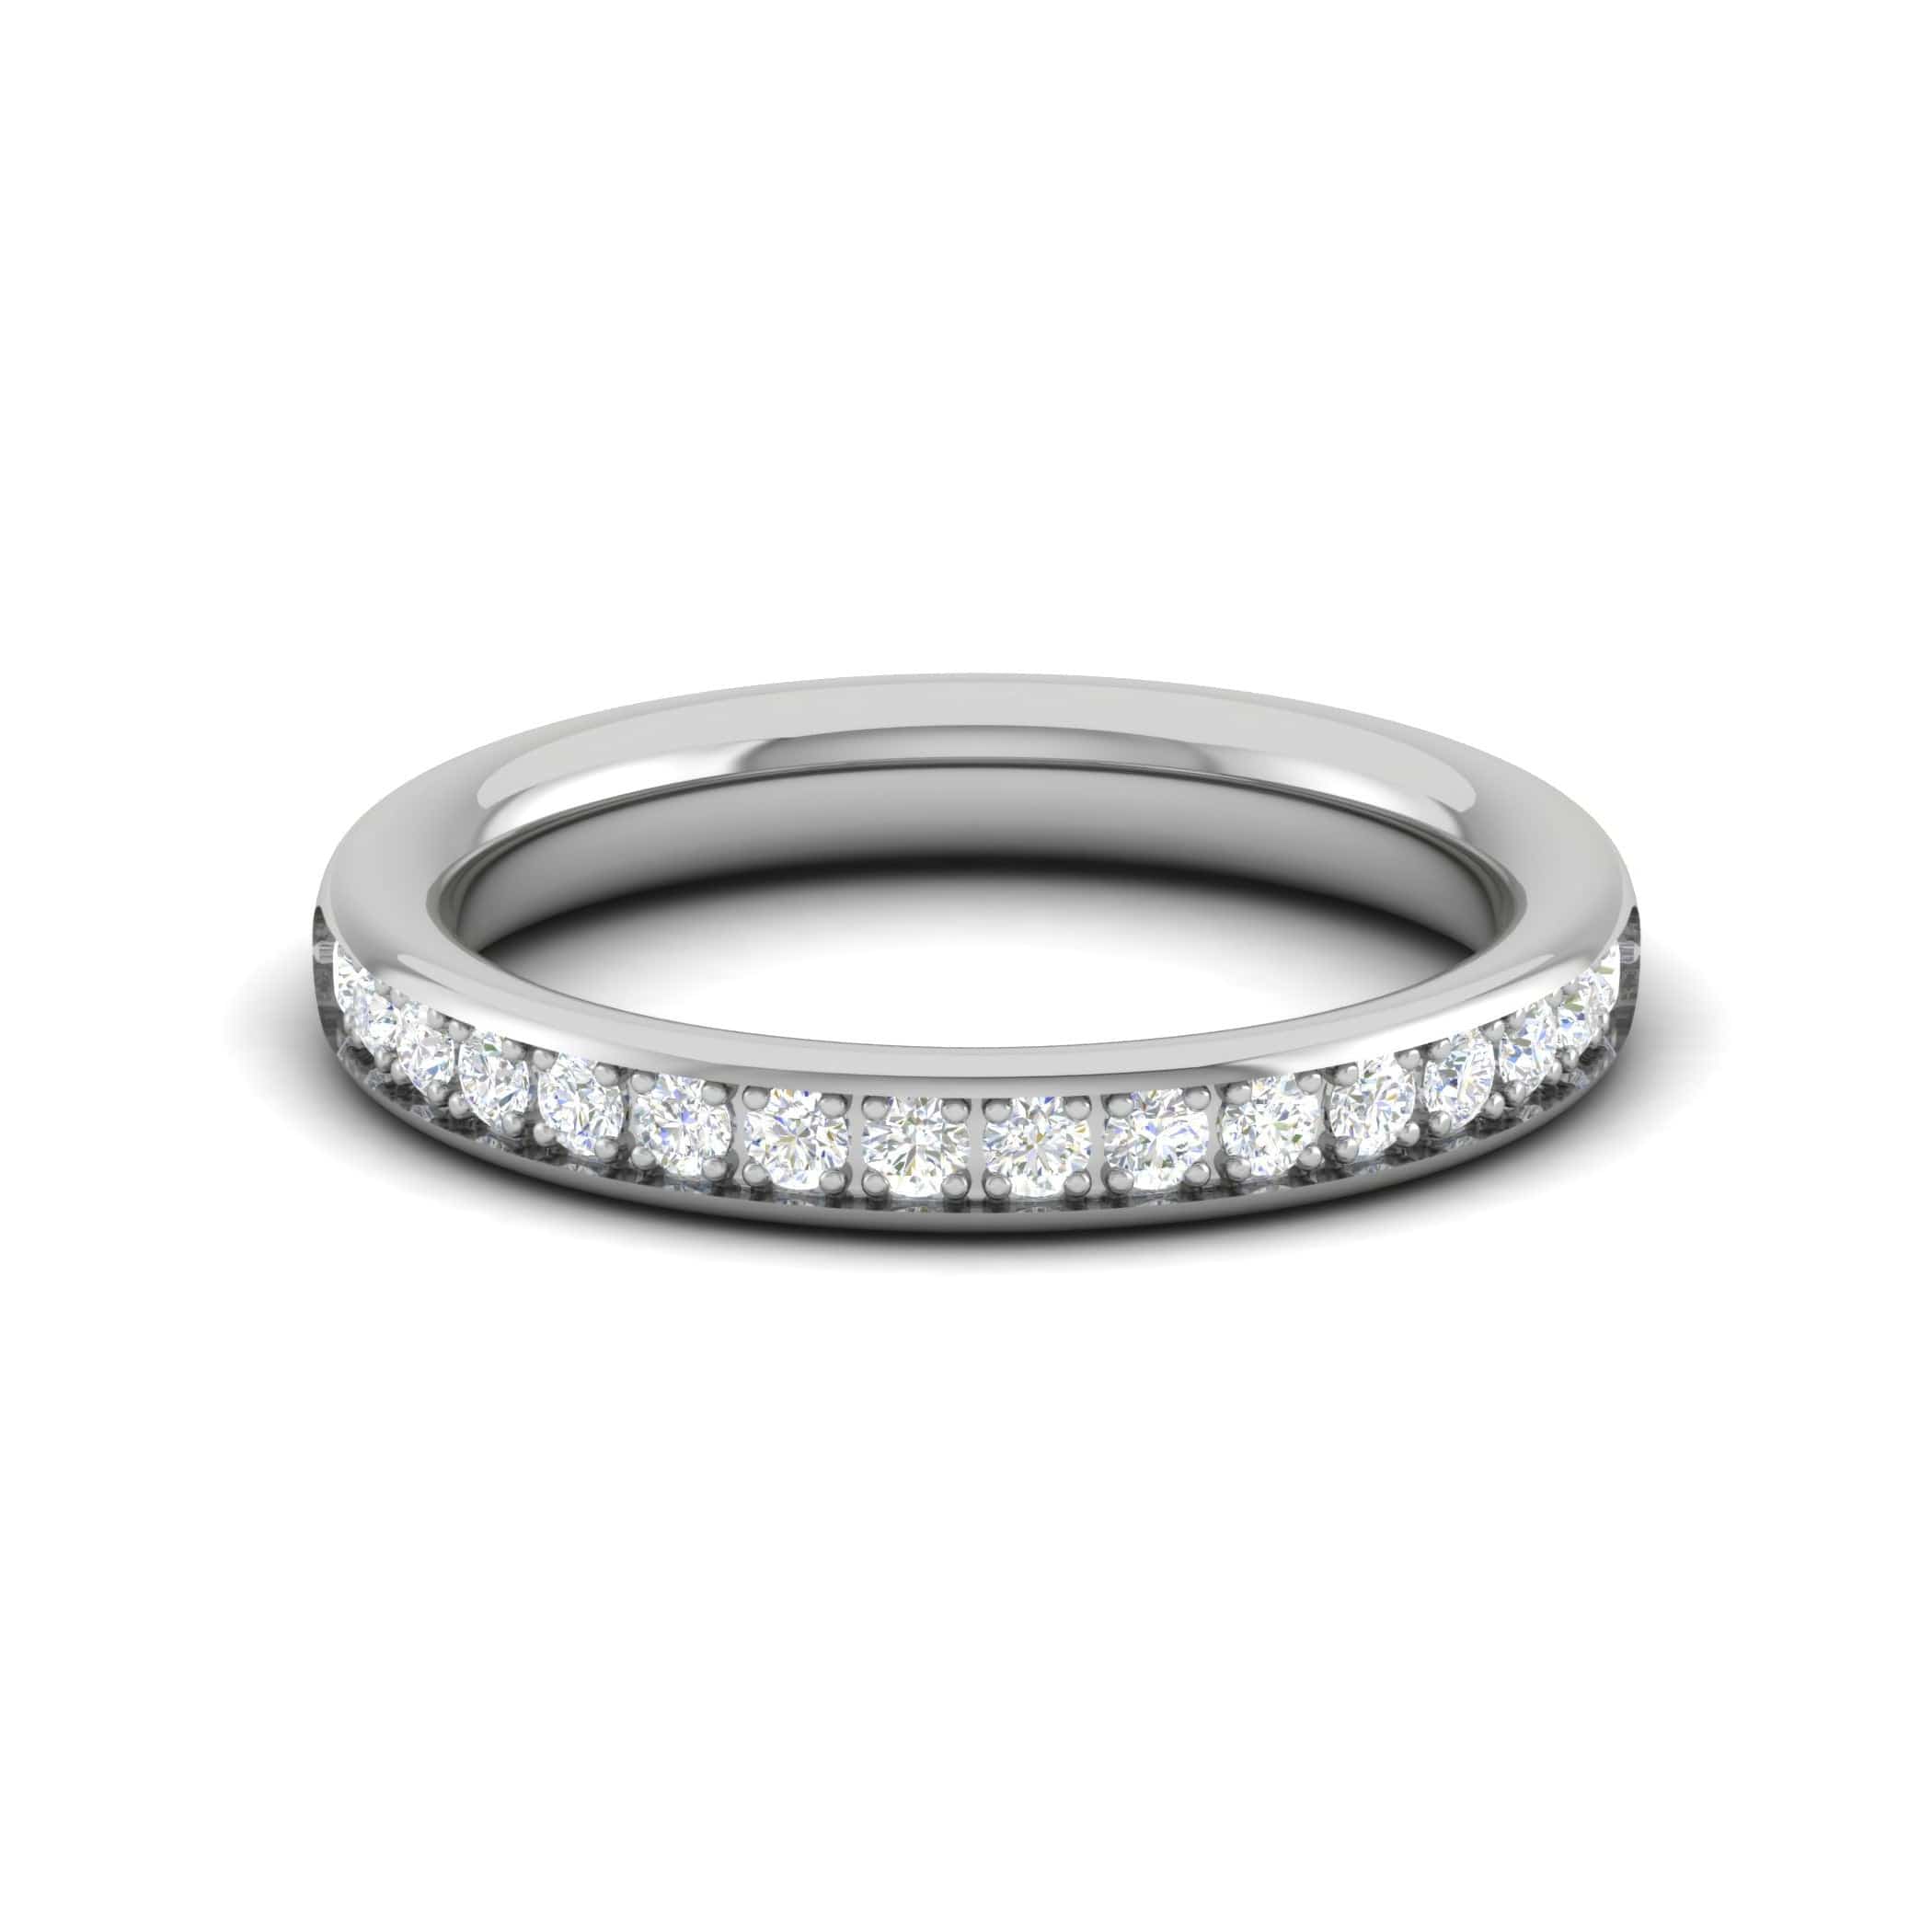 Buy Daily Wear Simple Diamond Ring Online at Best Price in India -  Jewelslane